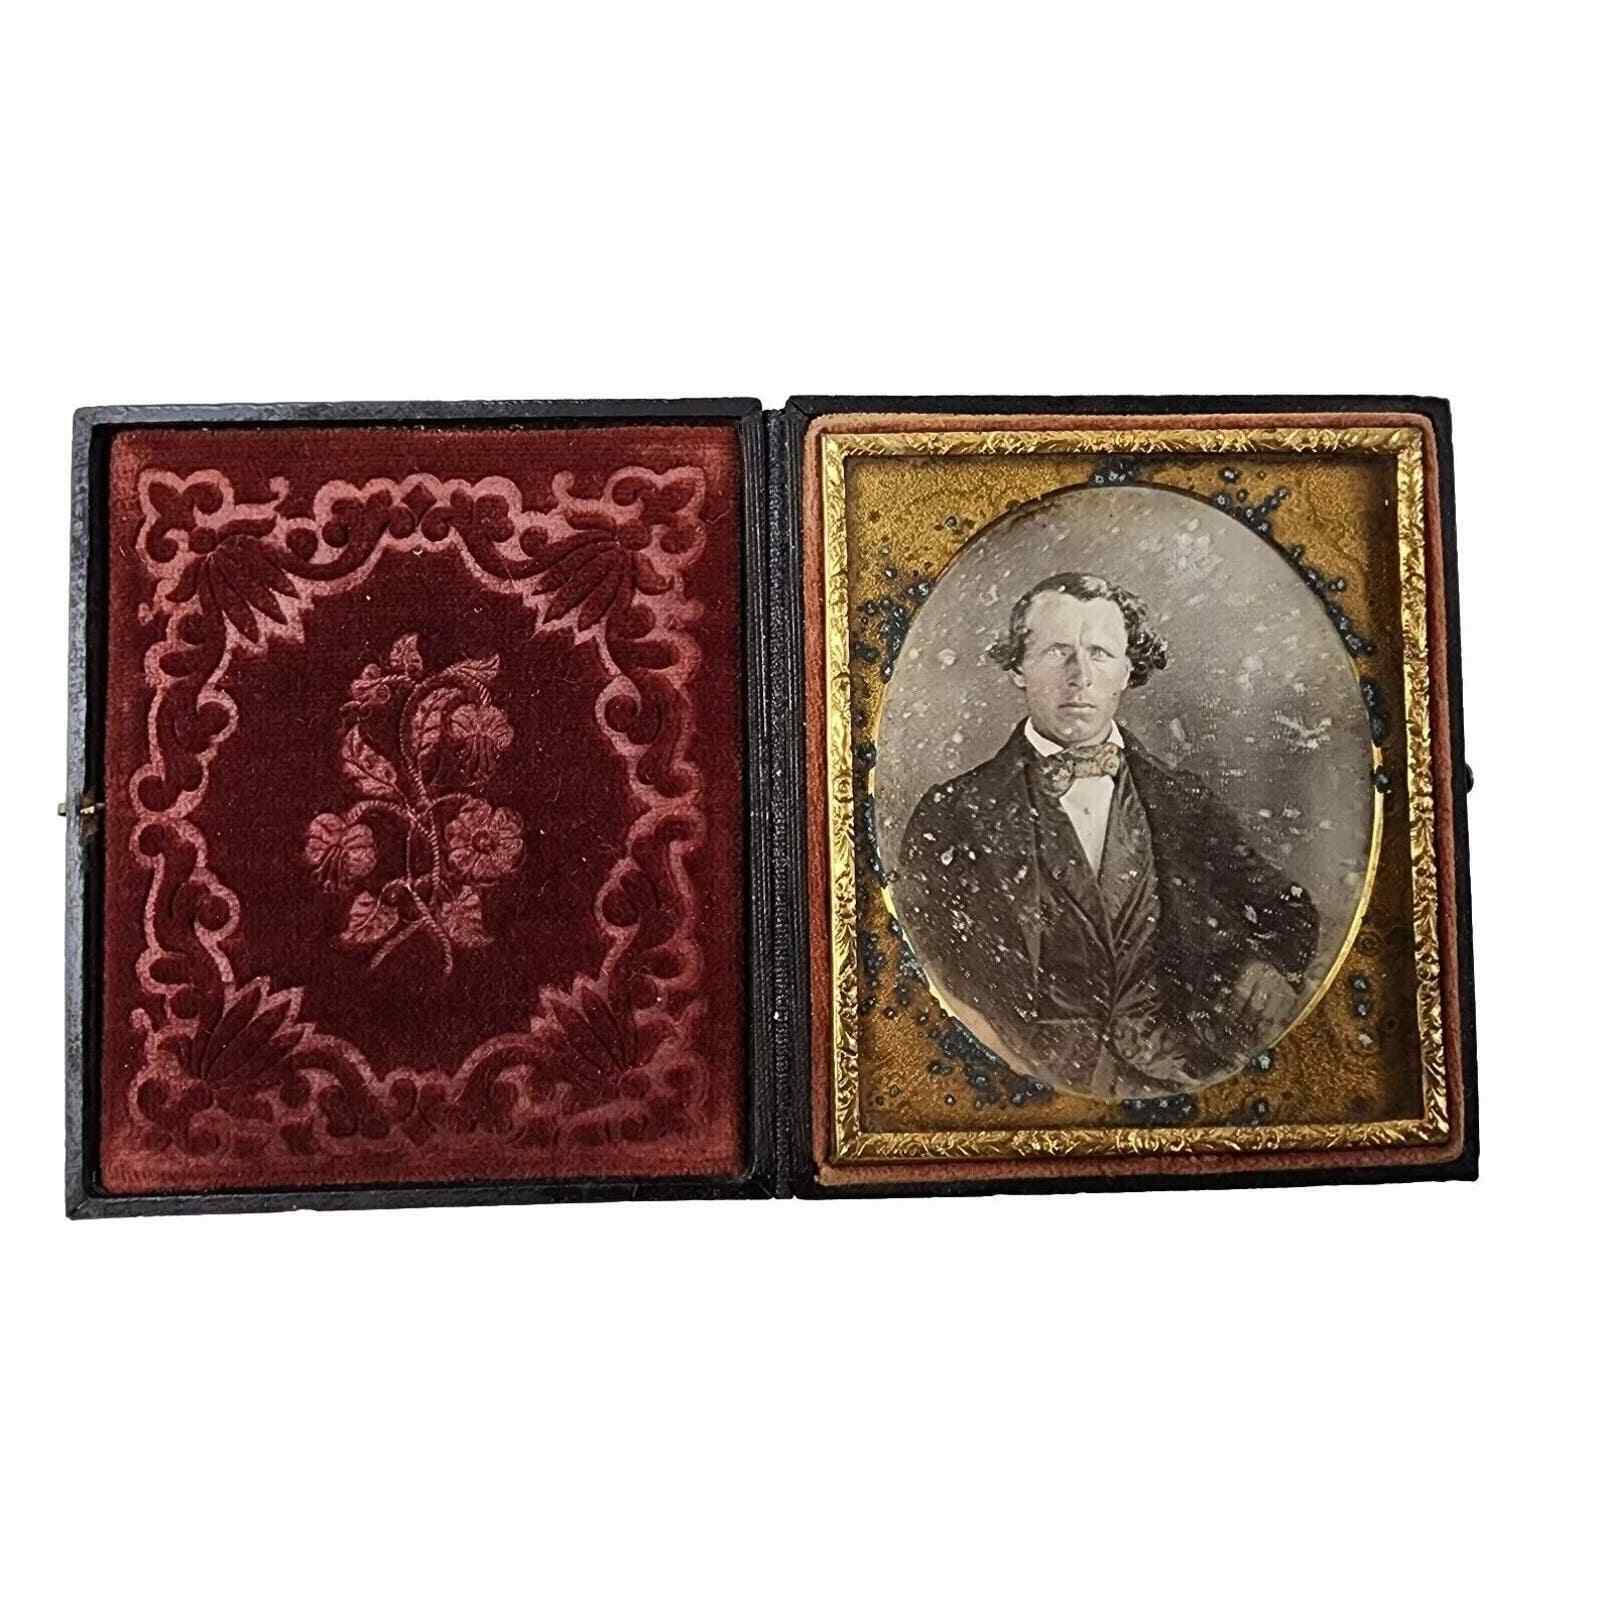 EXCELLENT 19th-C Dageurreotype, Portrait of Seated Handsome Man w/ 3pc Suit